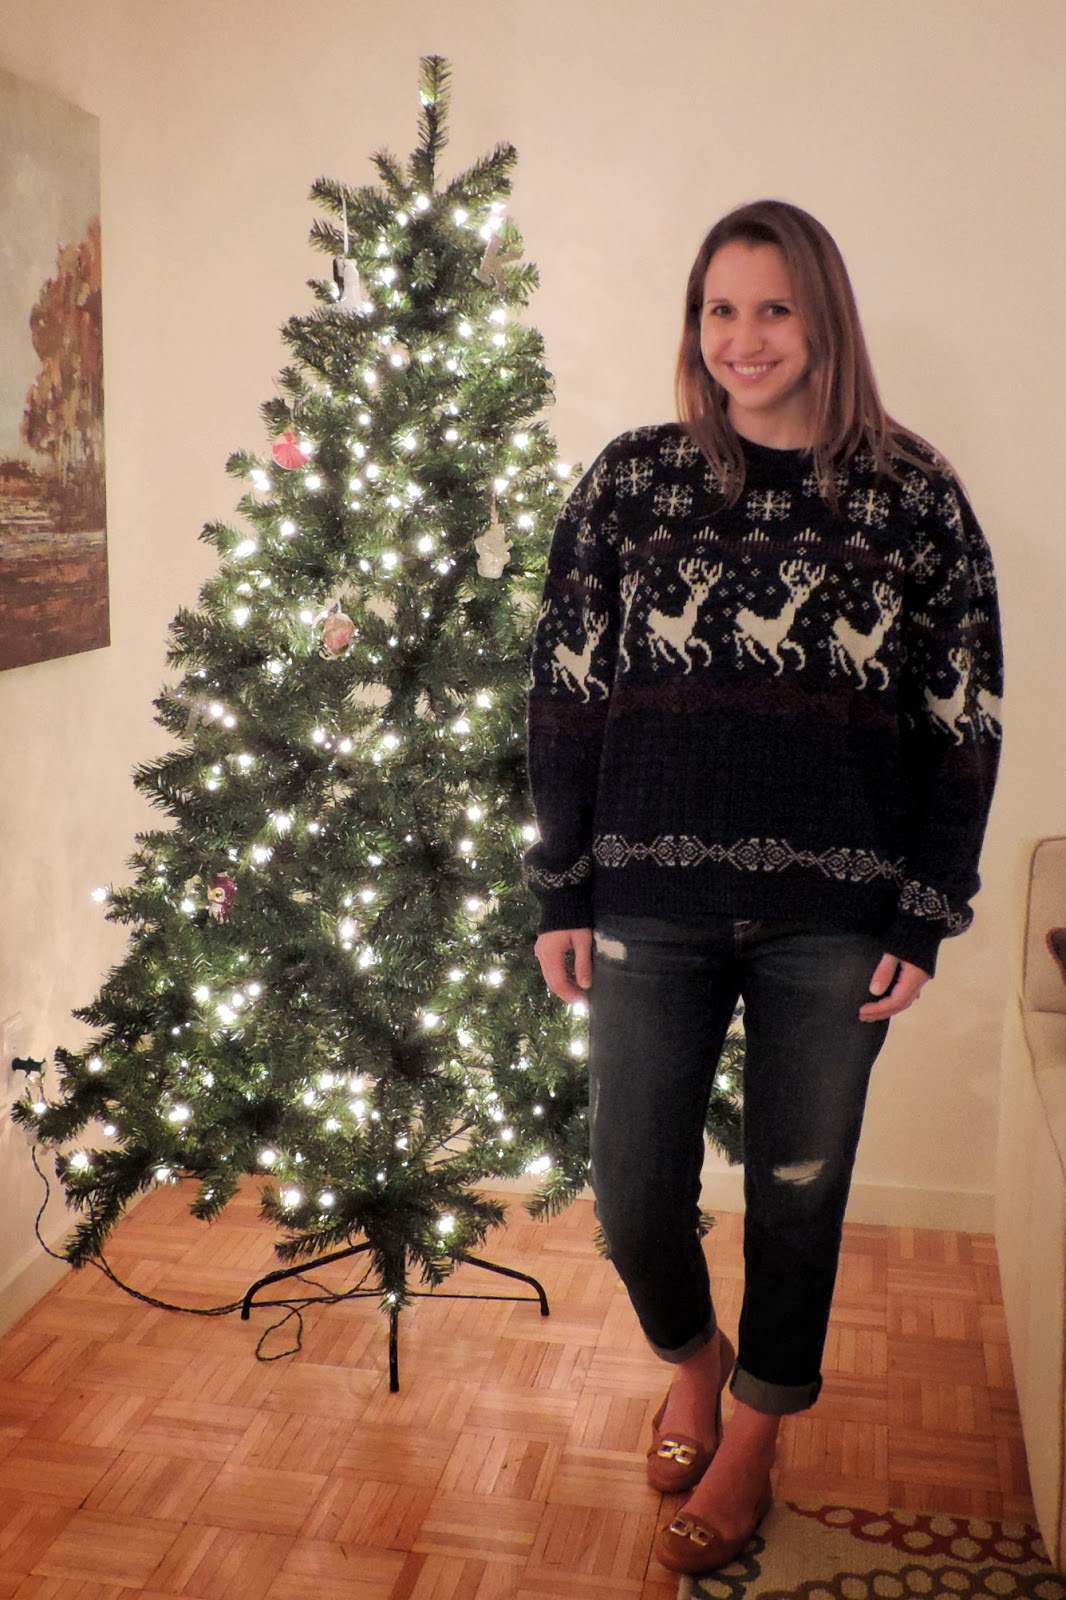 See What Katie Wears: Christmas Sweater Outfit for Decorating